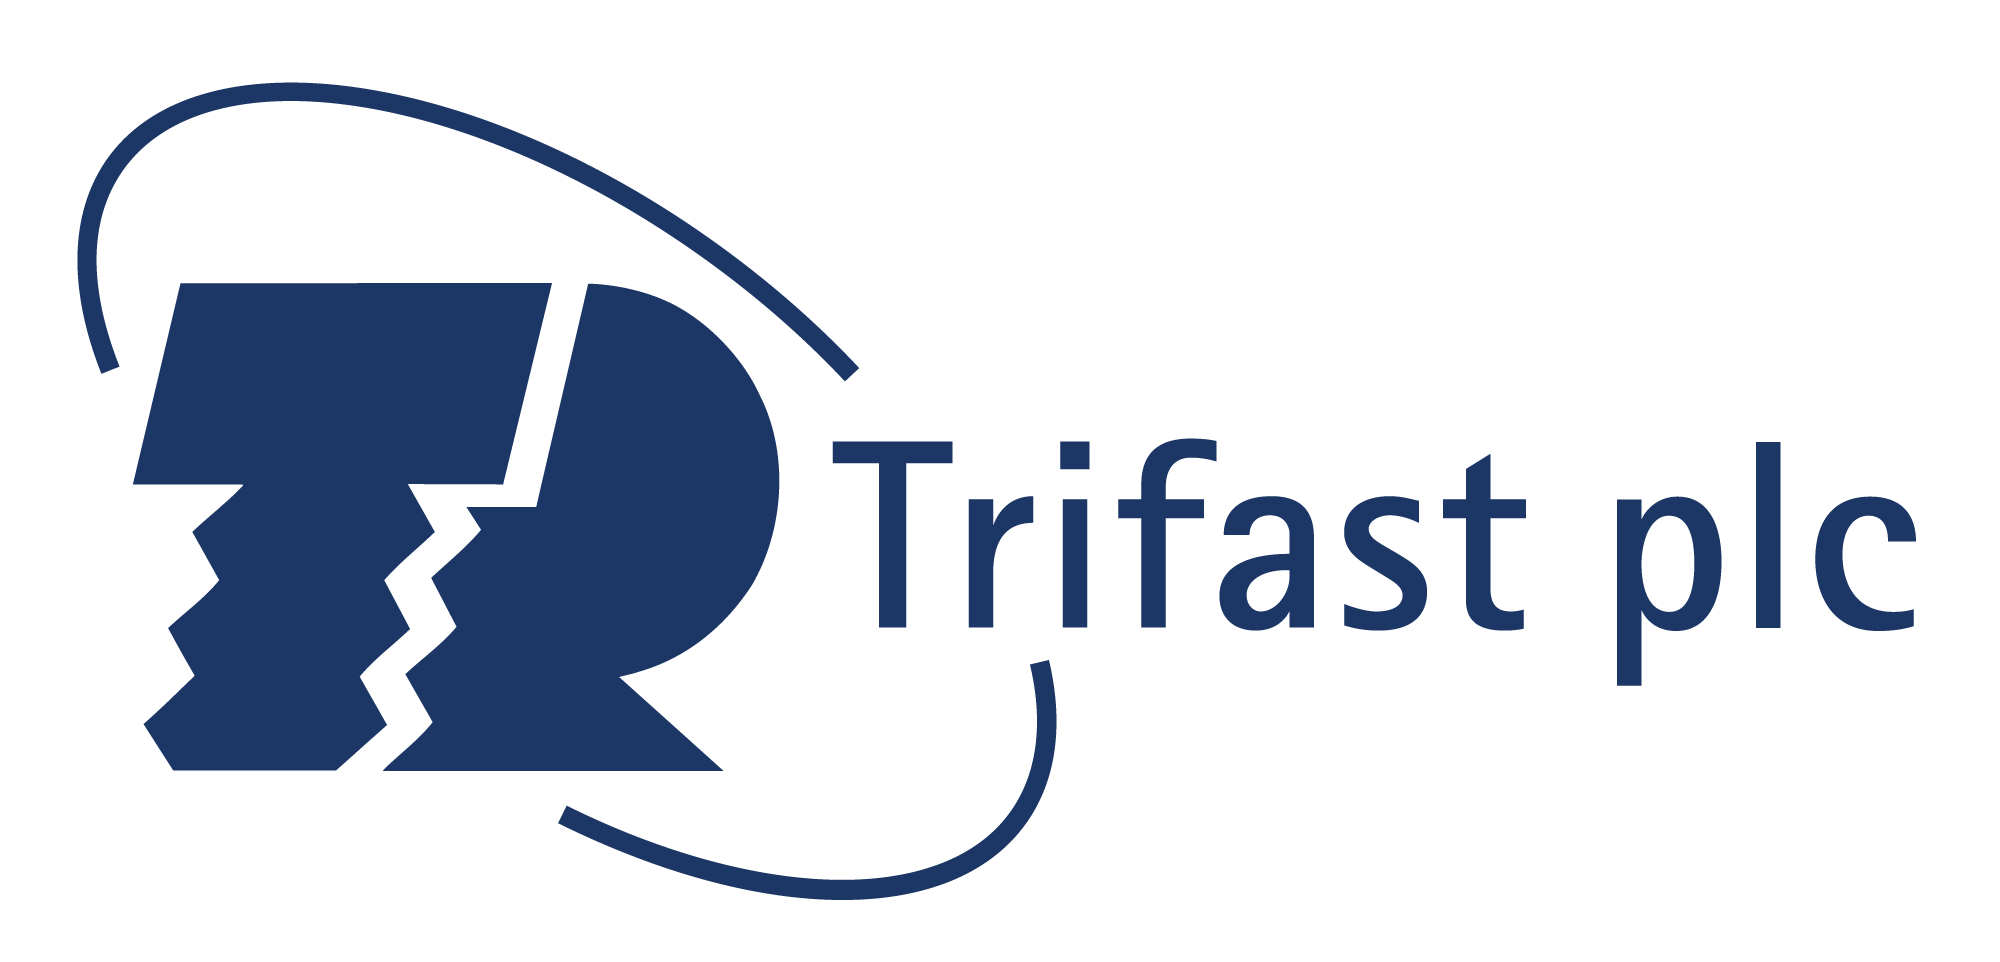 TRIFAST